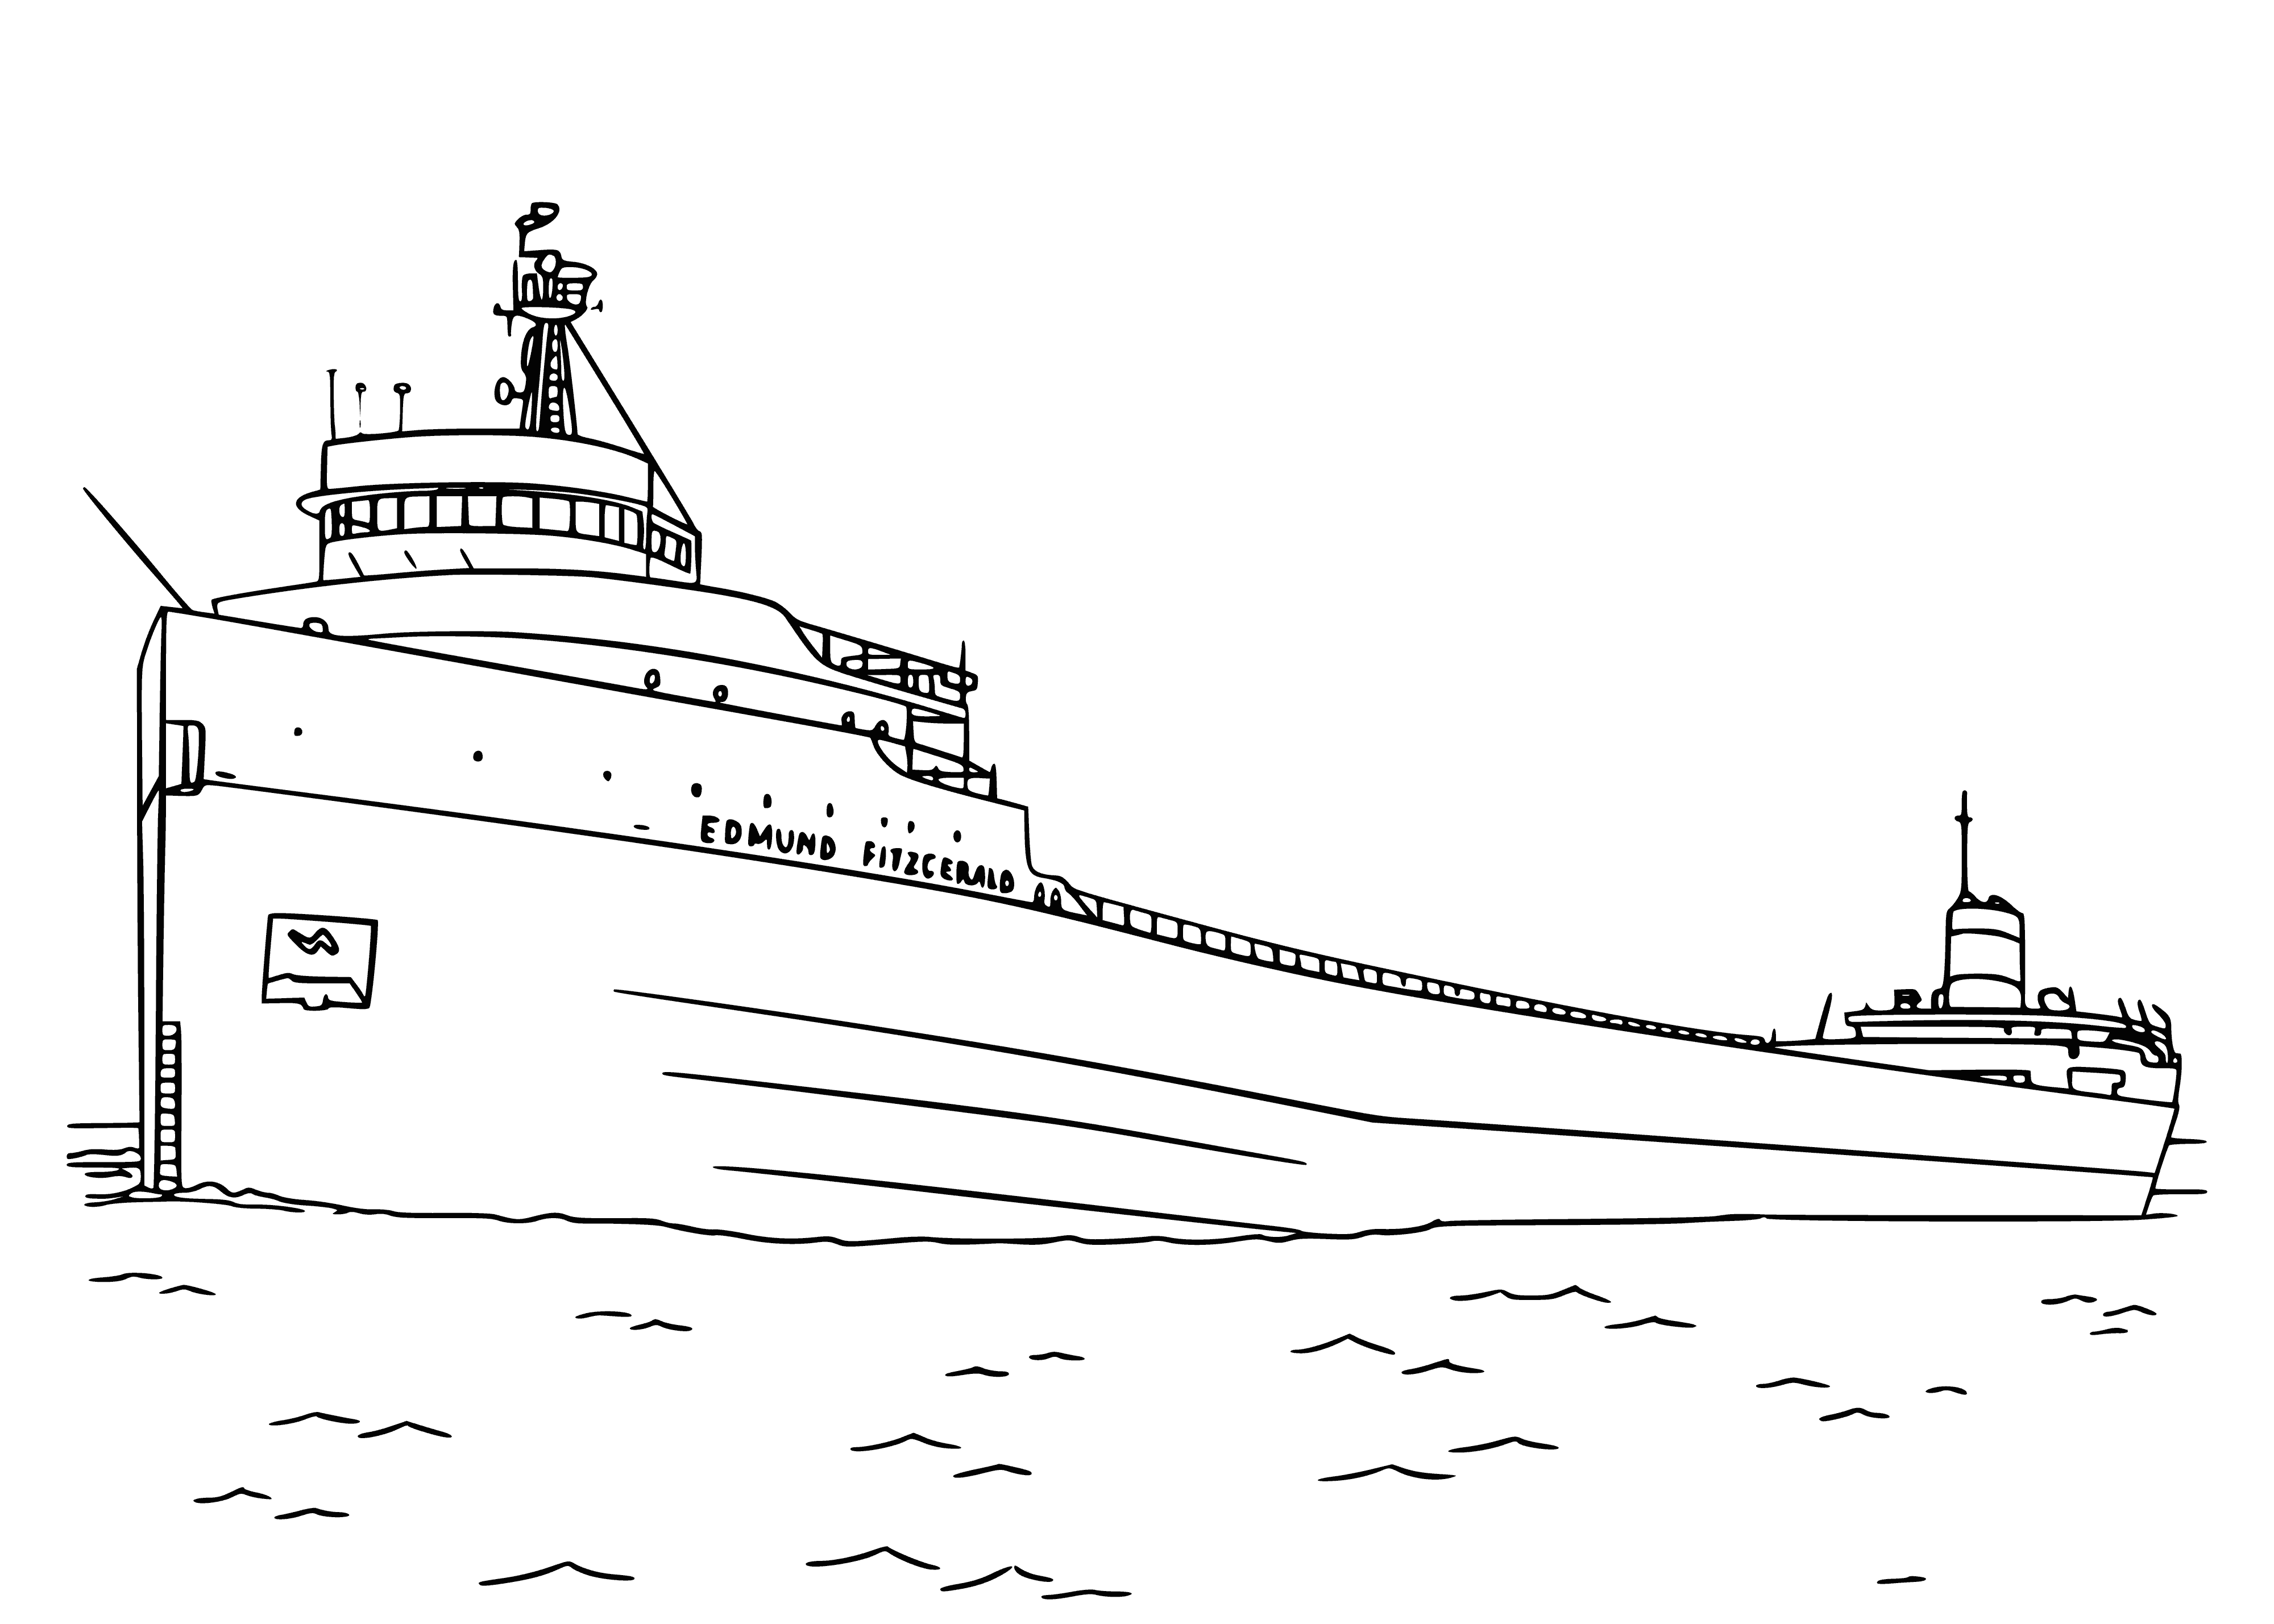 coloring page: Ship docked at port, crane lifting & stacking containers on dock.